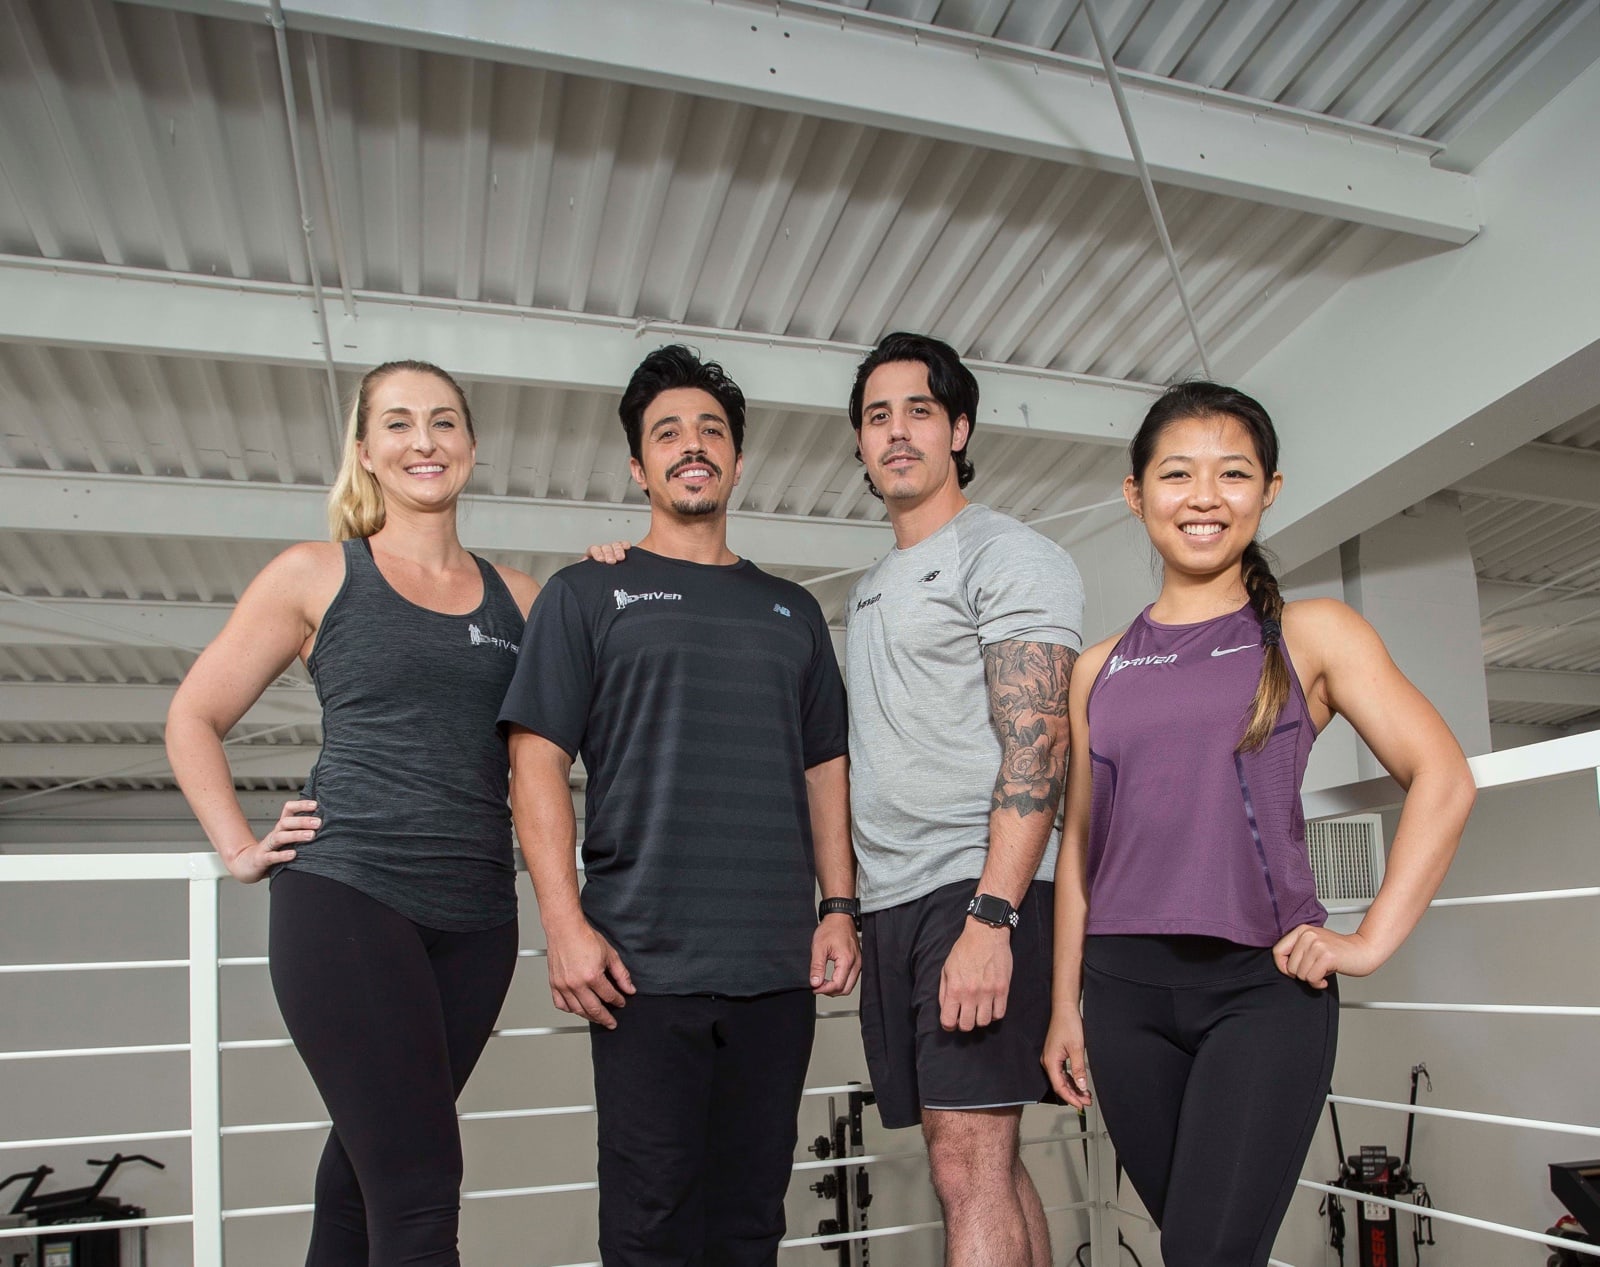 Tampa Personal Trainers -Drivenfit Team